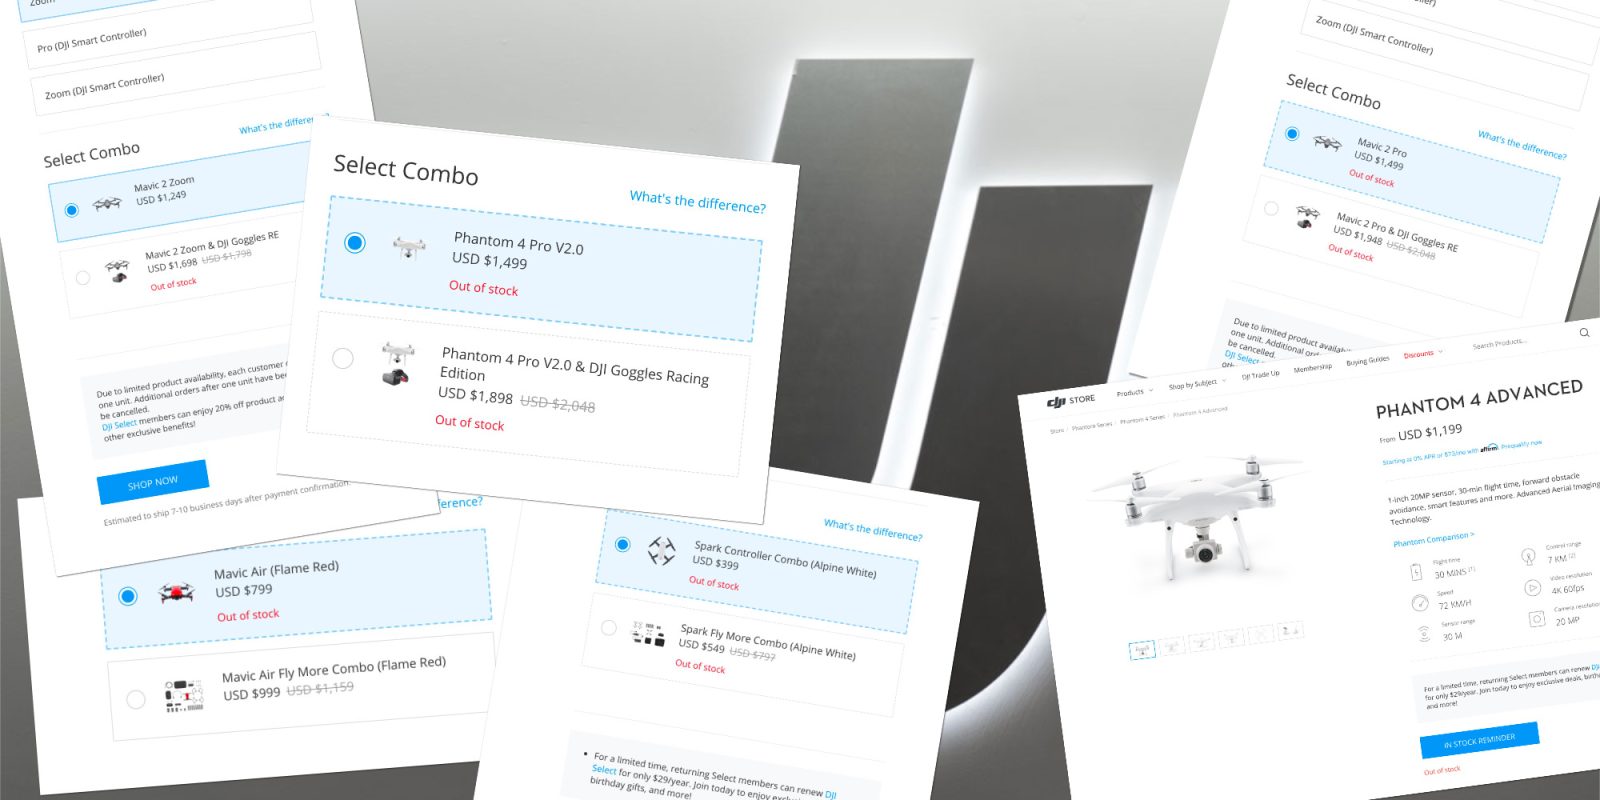 Almost all DJI drones are out of stock